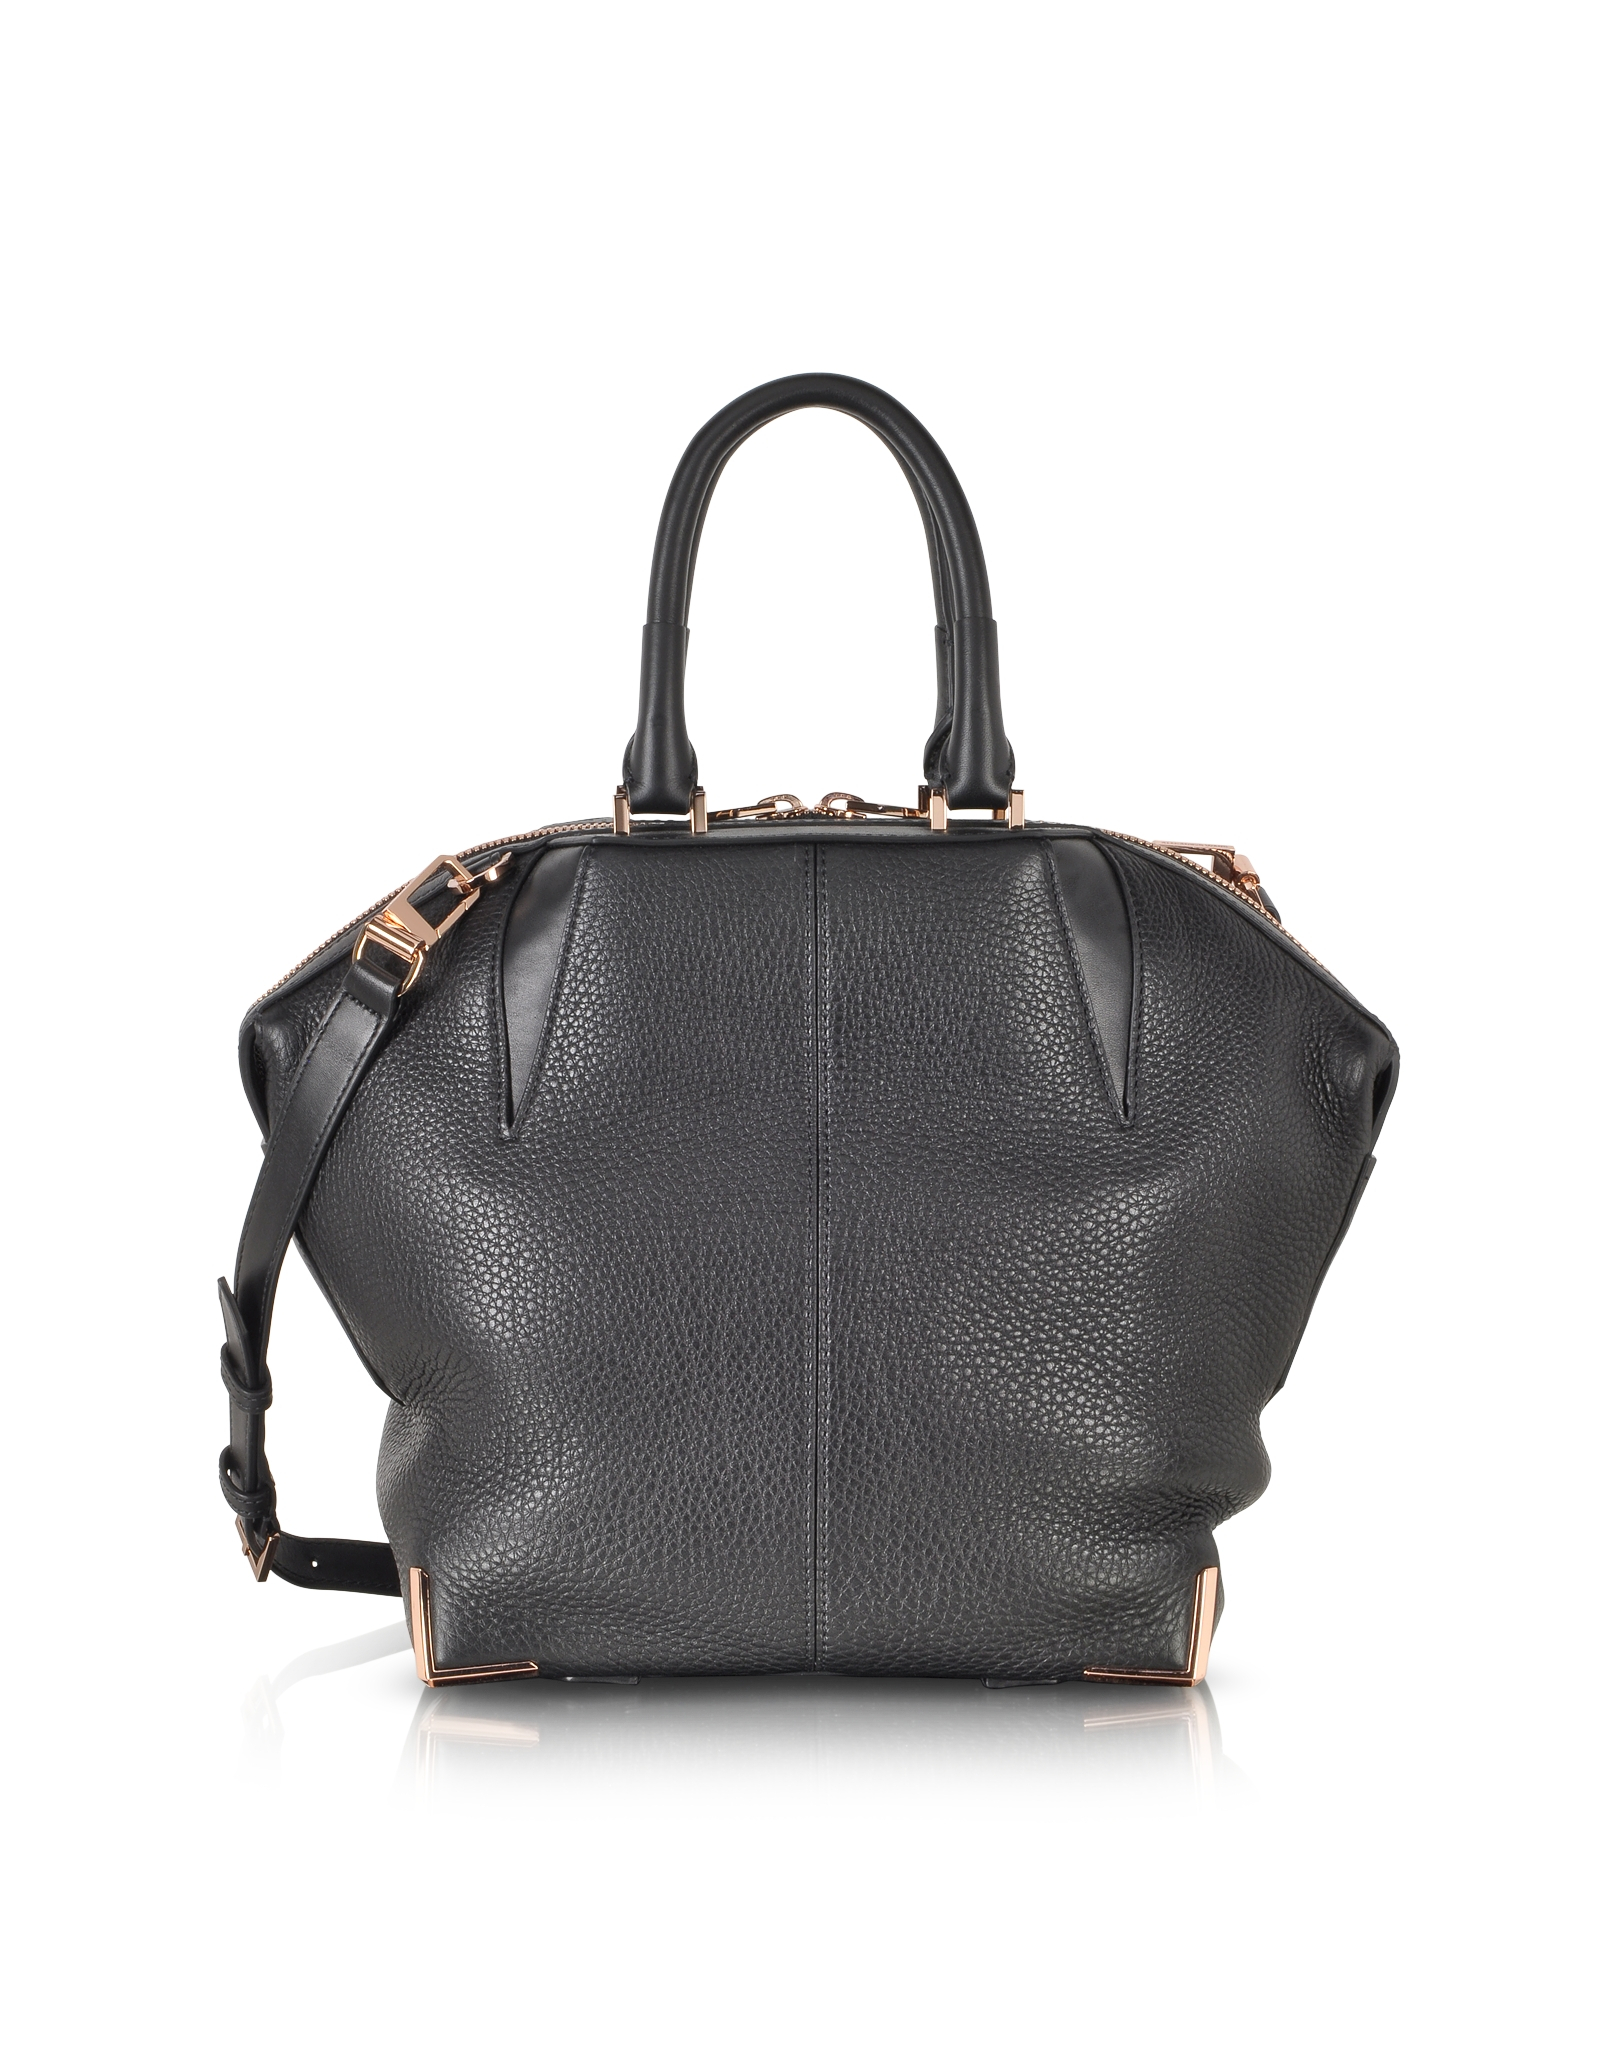 Lyst - Alexander Wang Small Emilie In Soft Black With Rose Gold Tote in ...